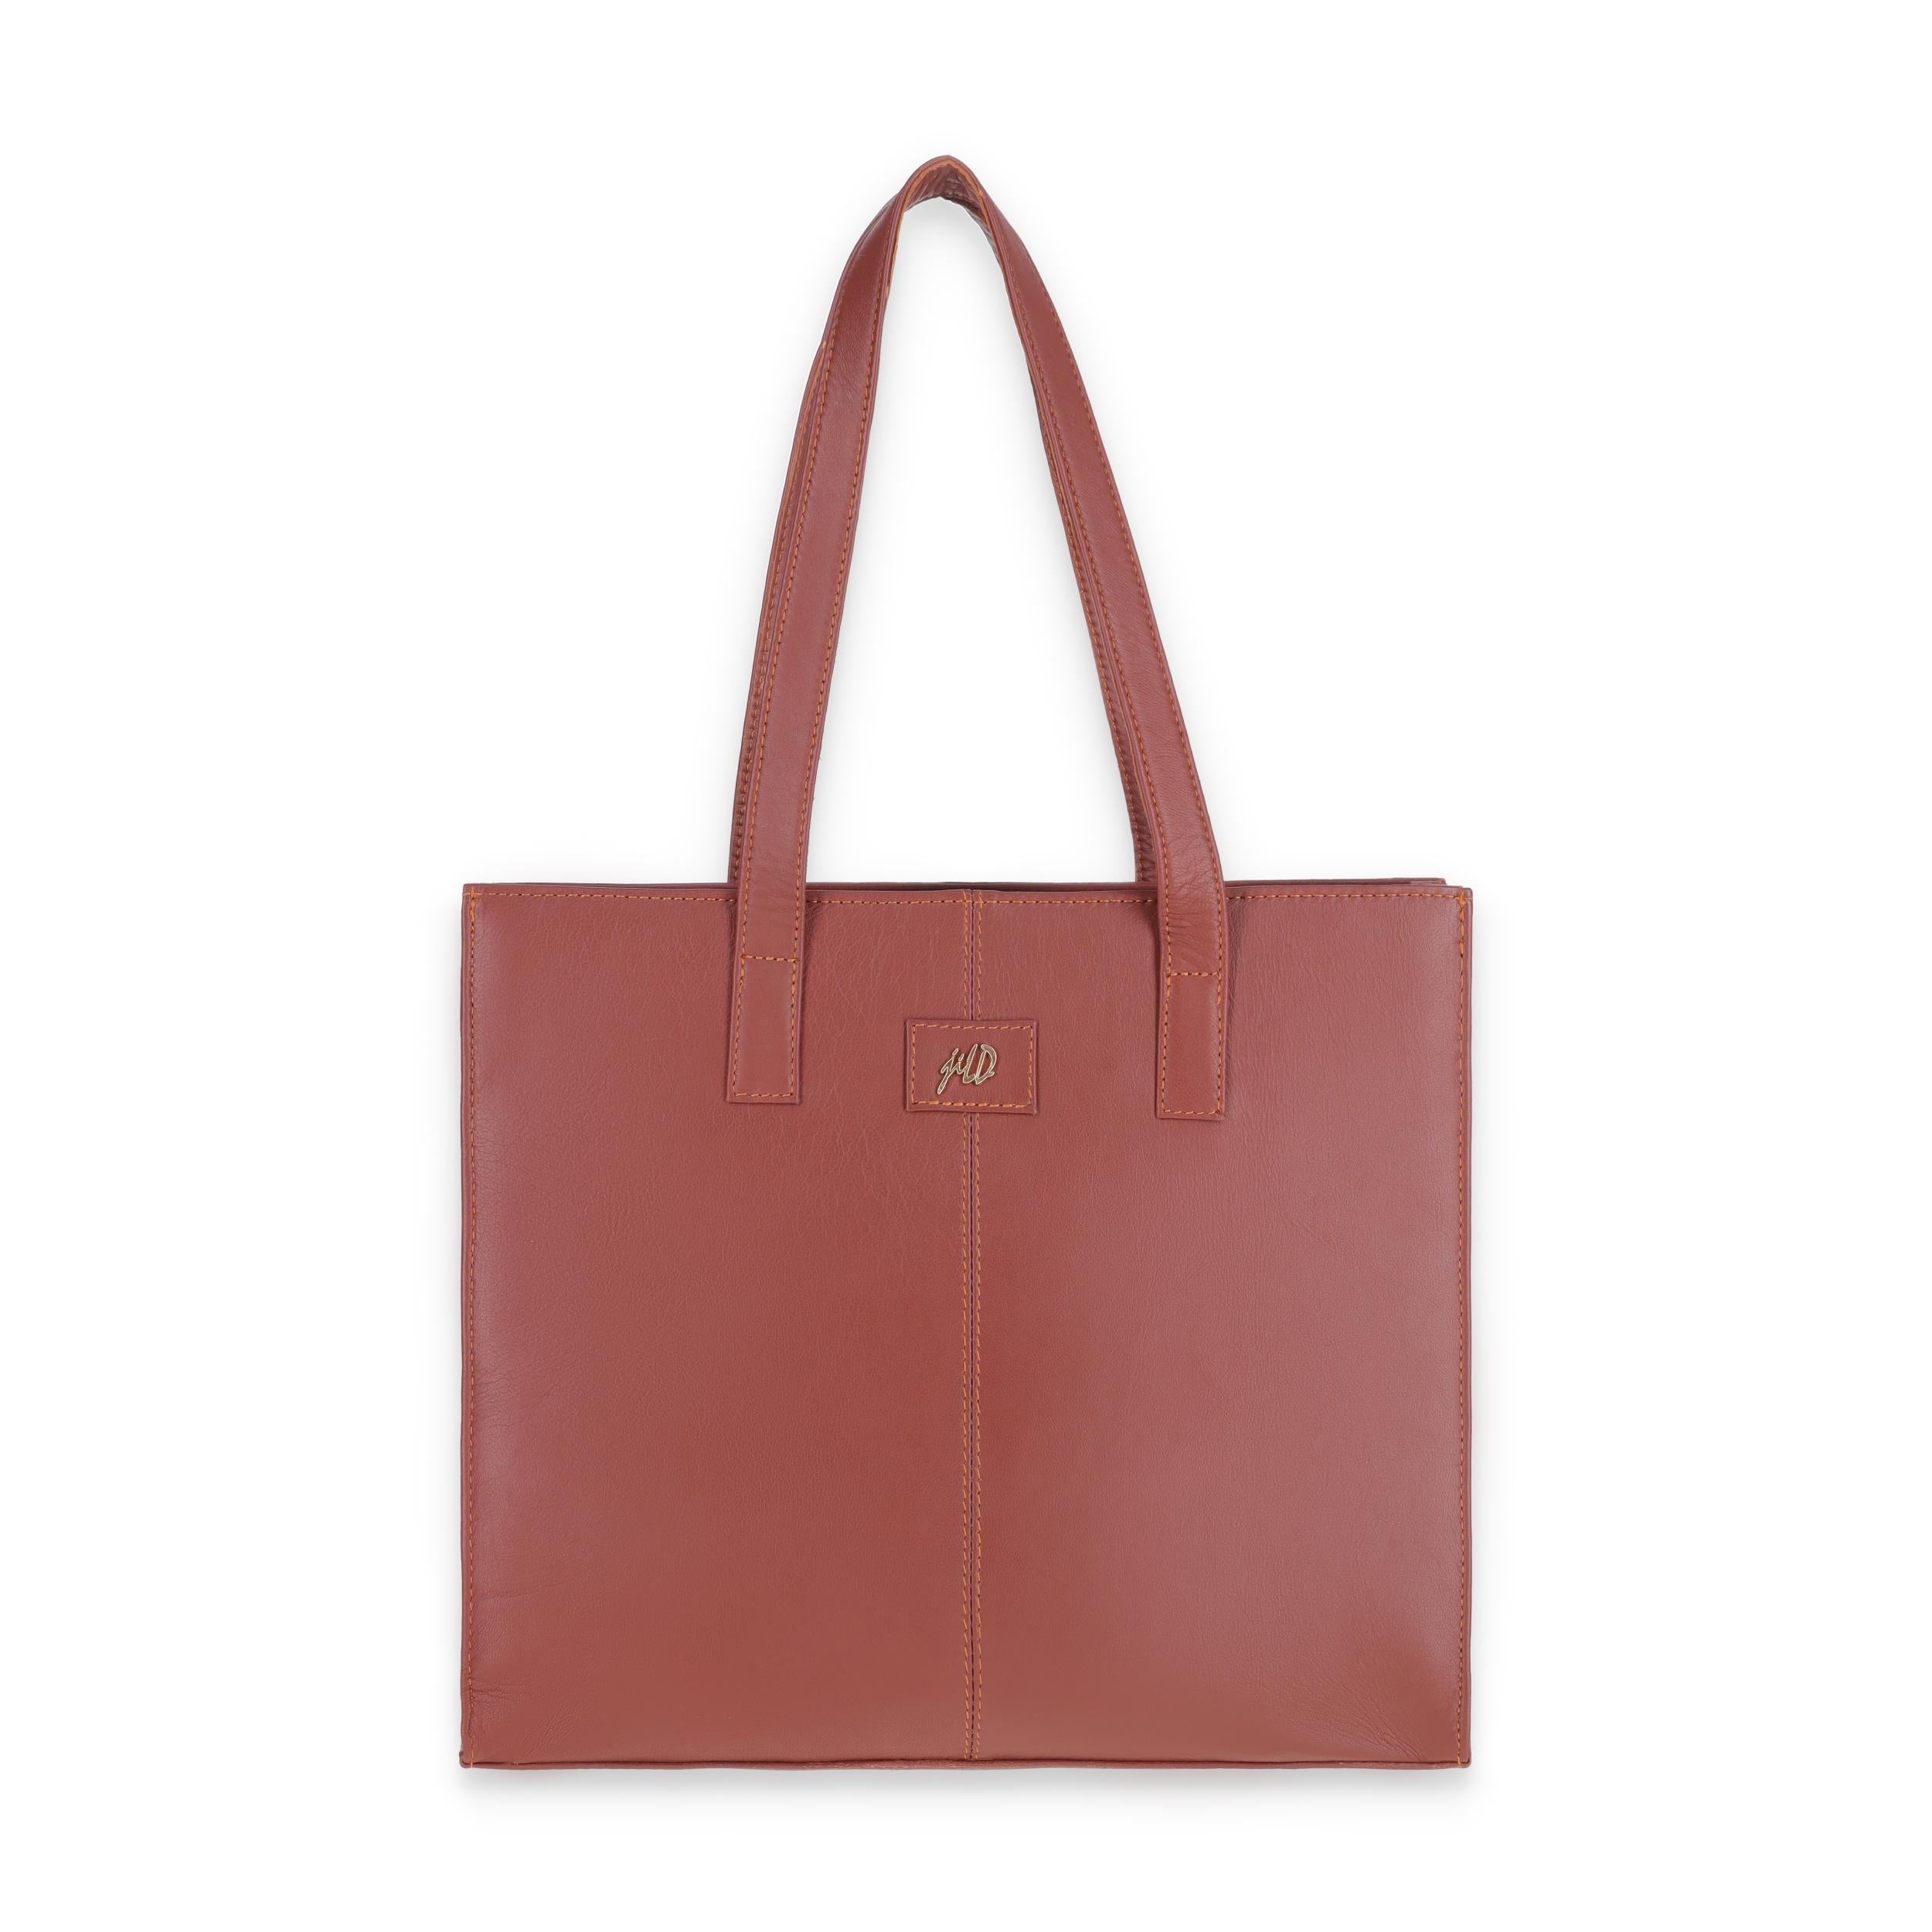 Everyday Women's Leather  Zipper Tote Bag-Tan Brown